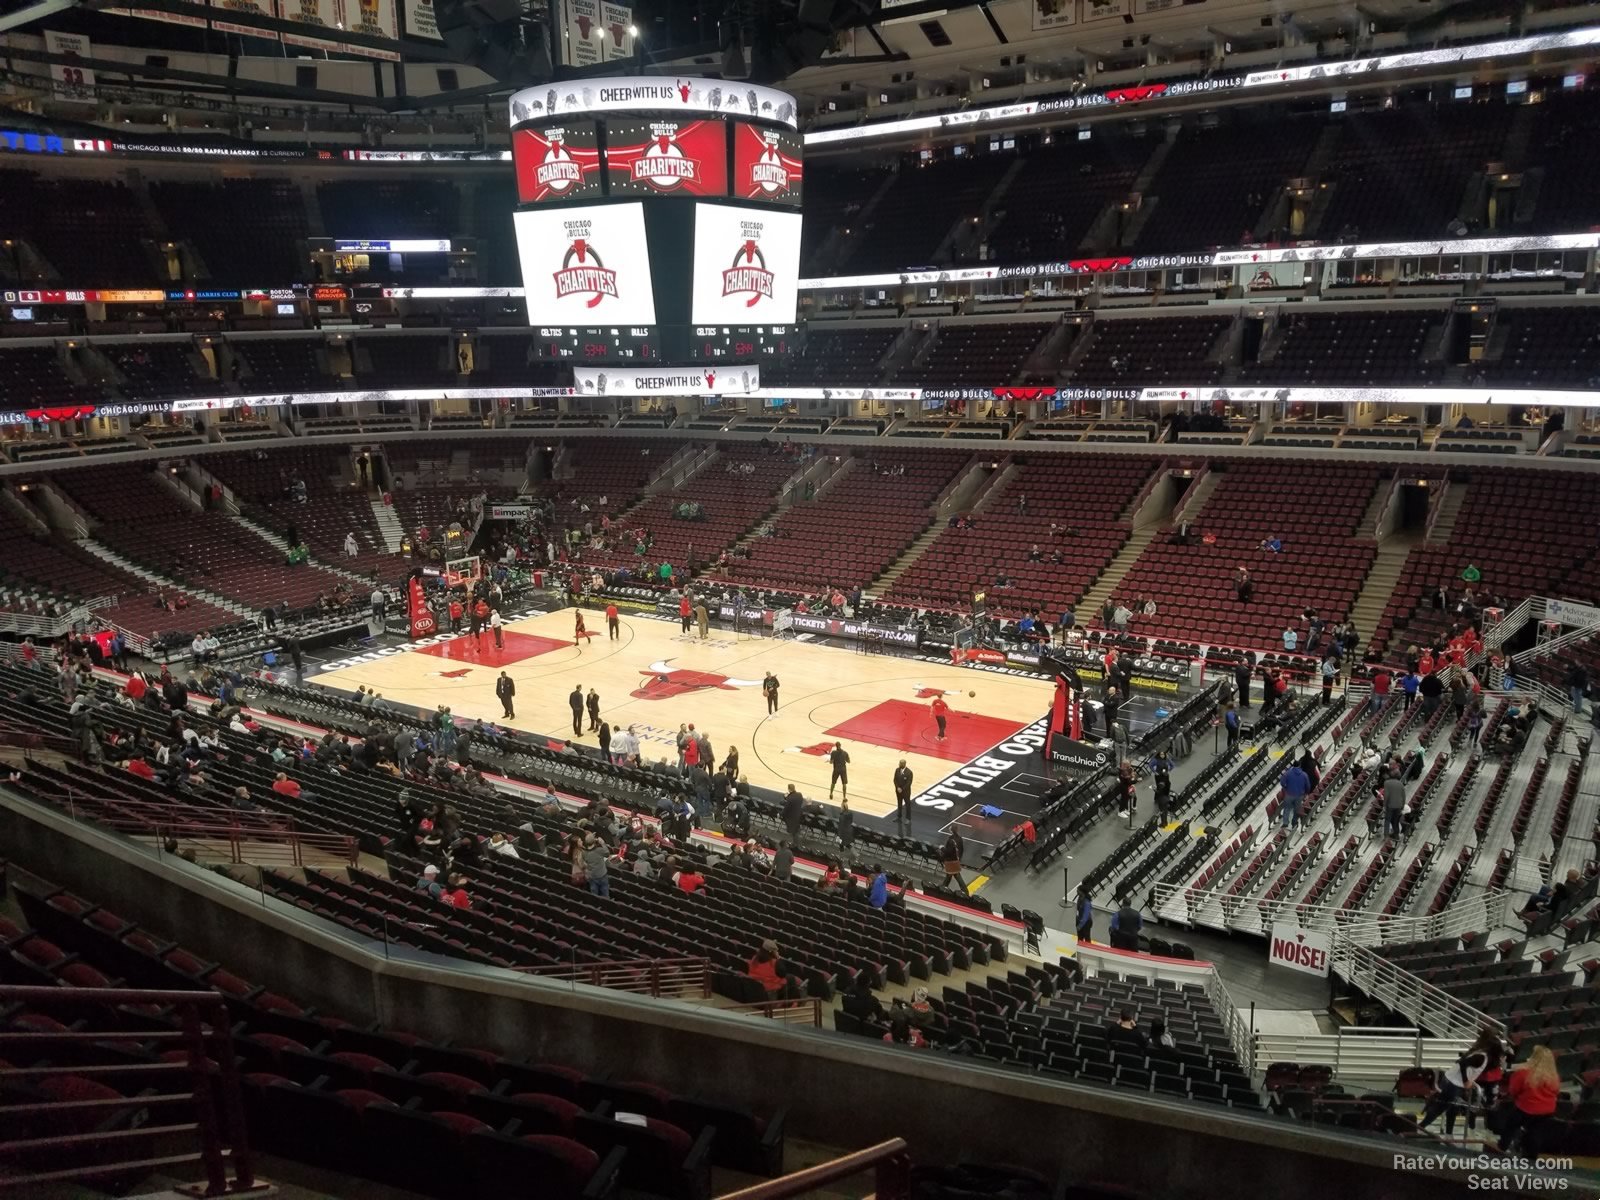 United Center Section 214 - Chicago Bulls - RateYourSeats.com